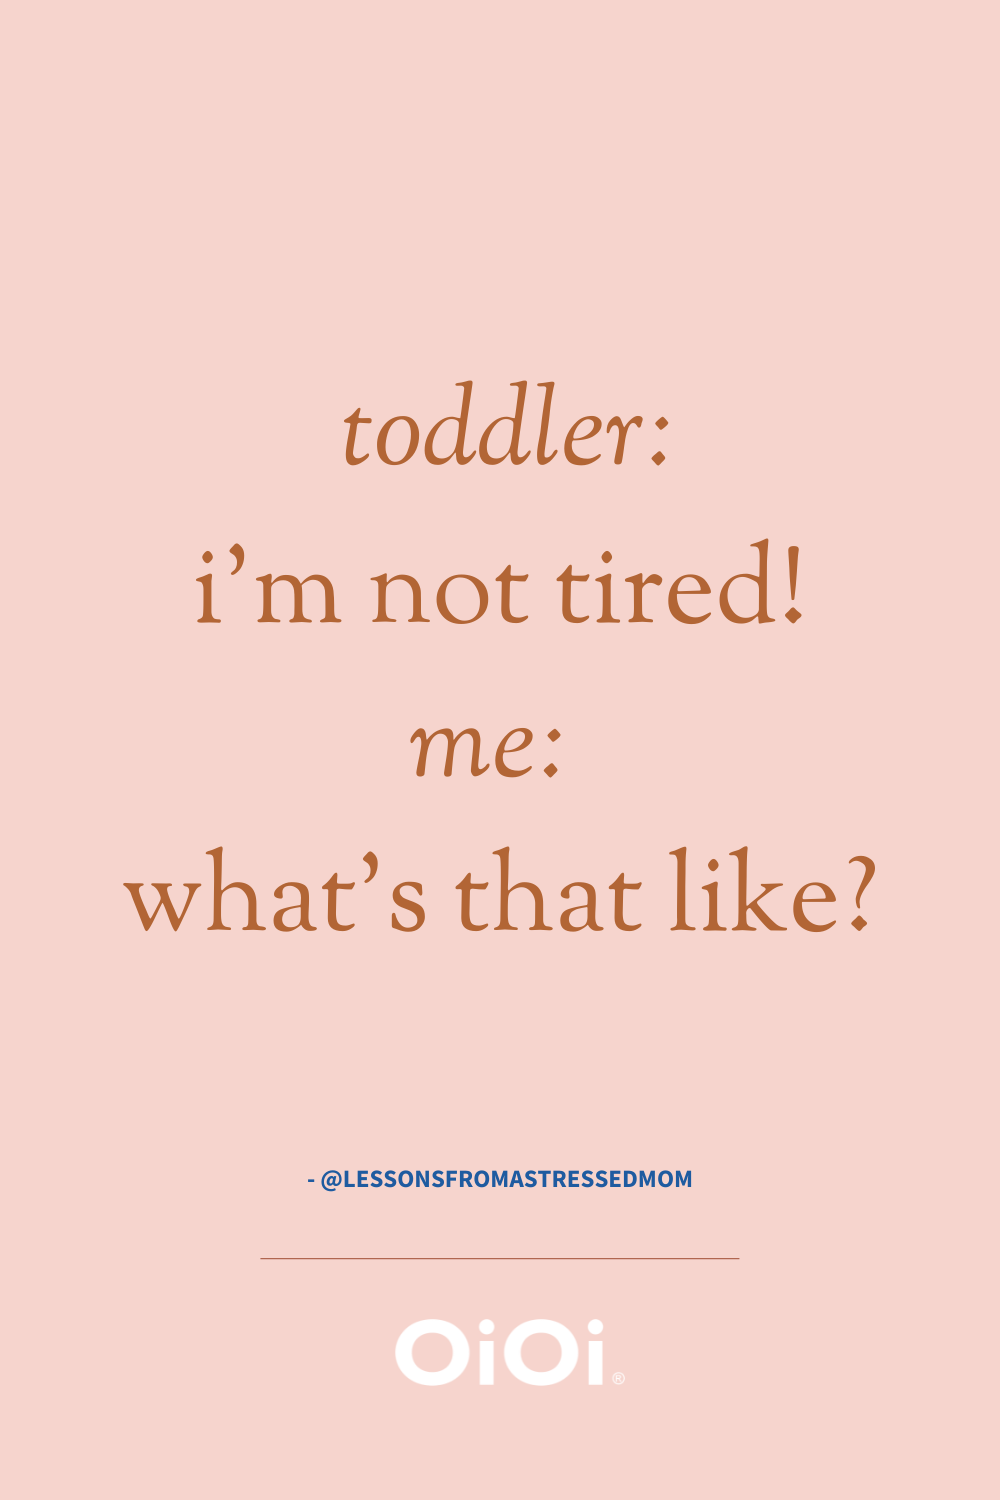 mum quotes about being tired